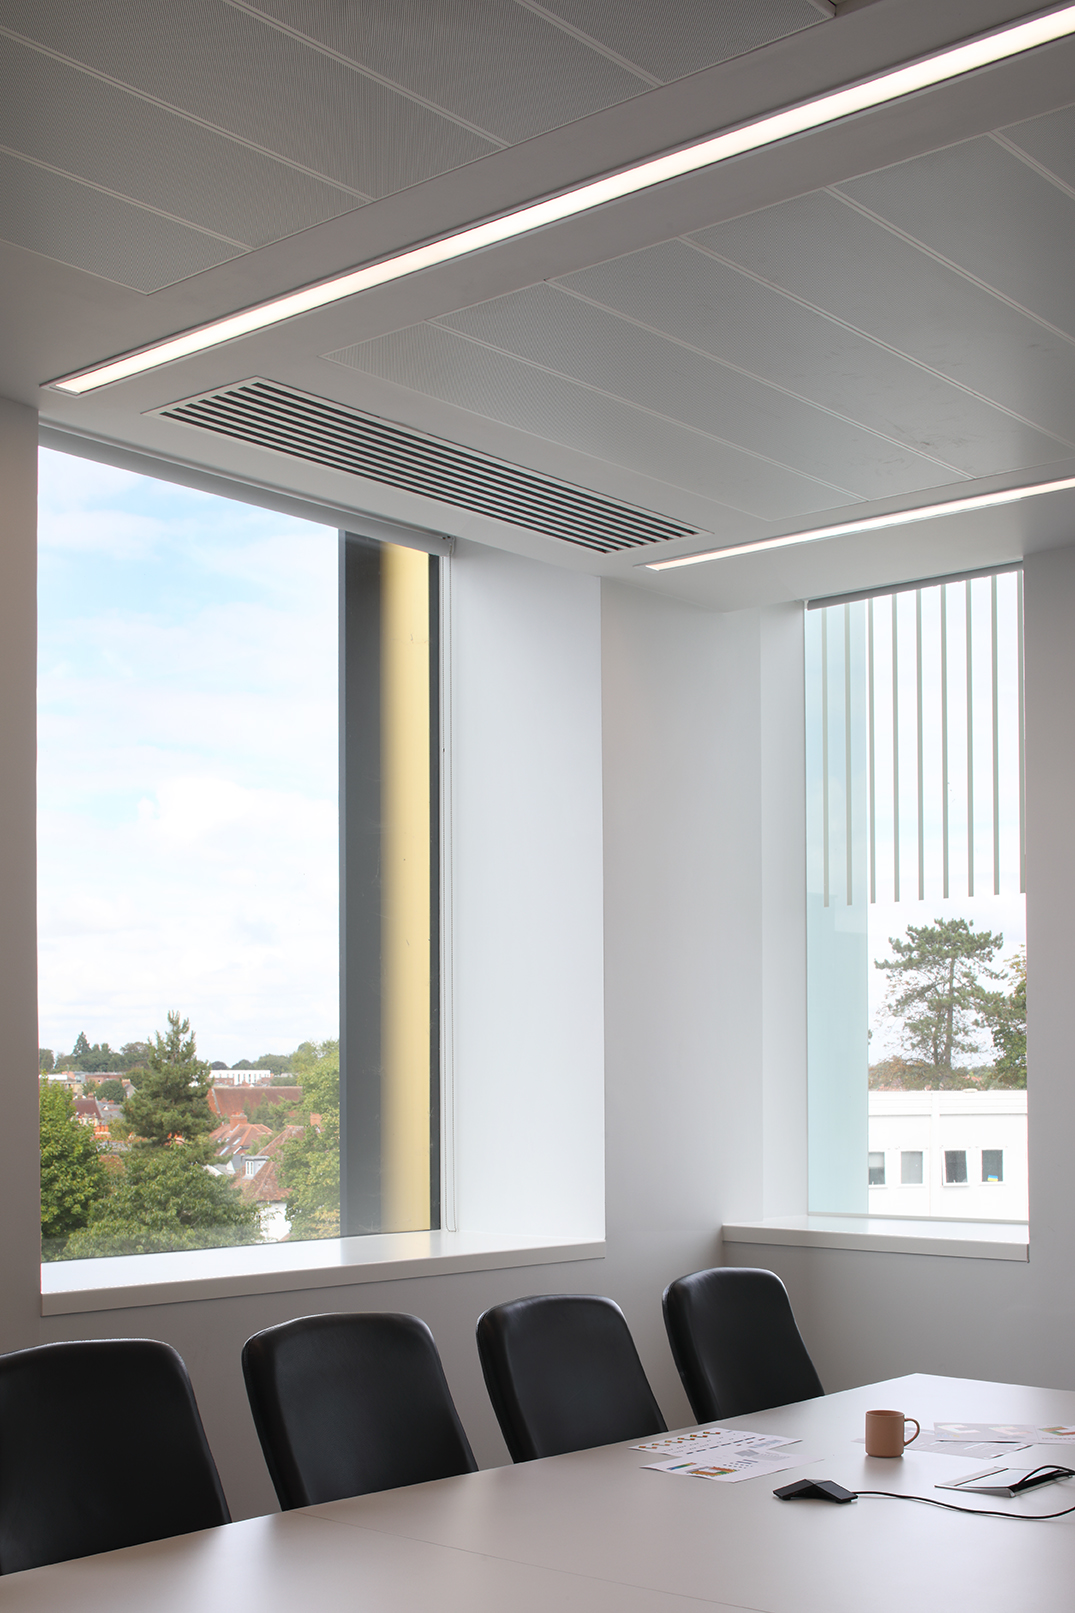 Kennedy Institute, Oxford. Interiors of rooftop extension by Fathom Architects.